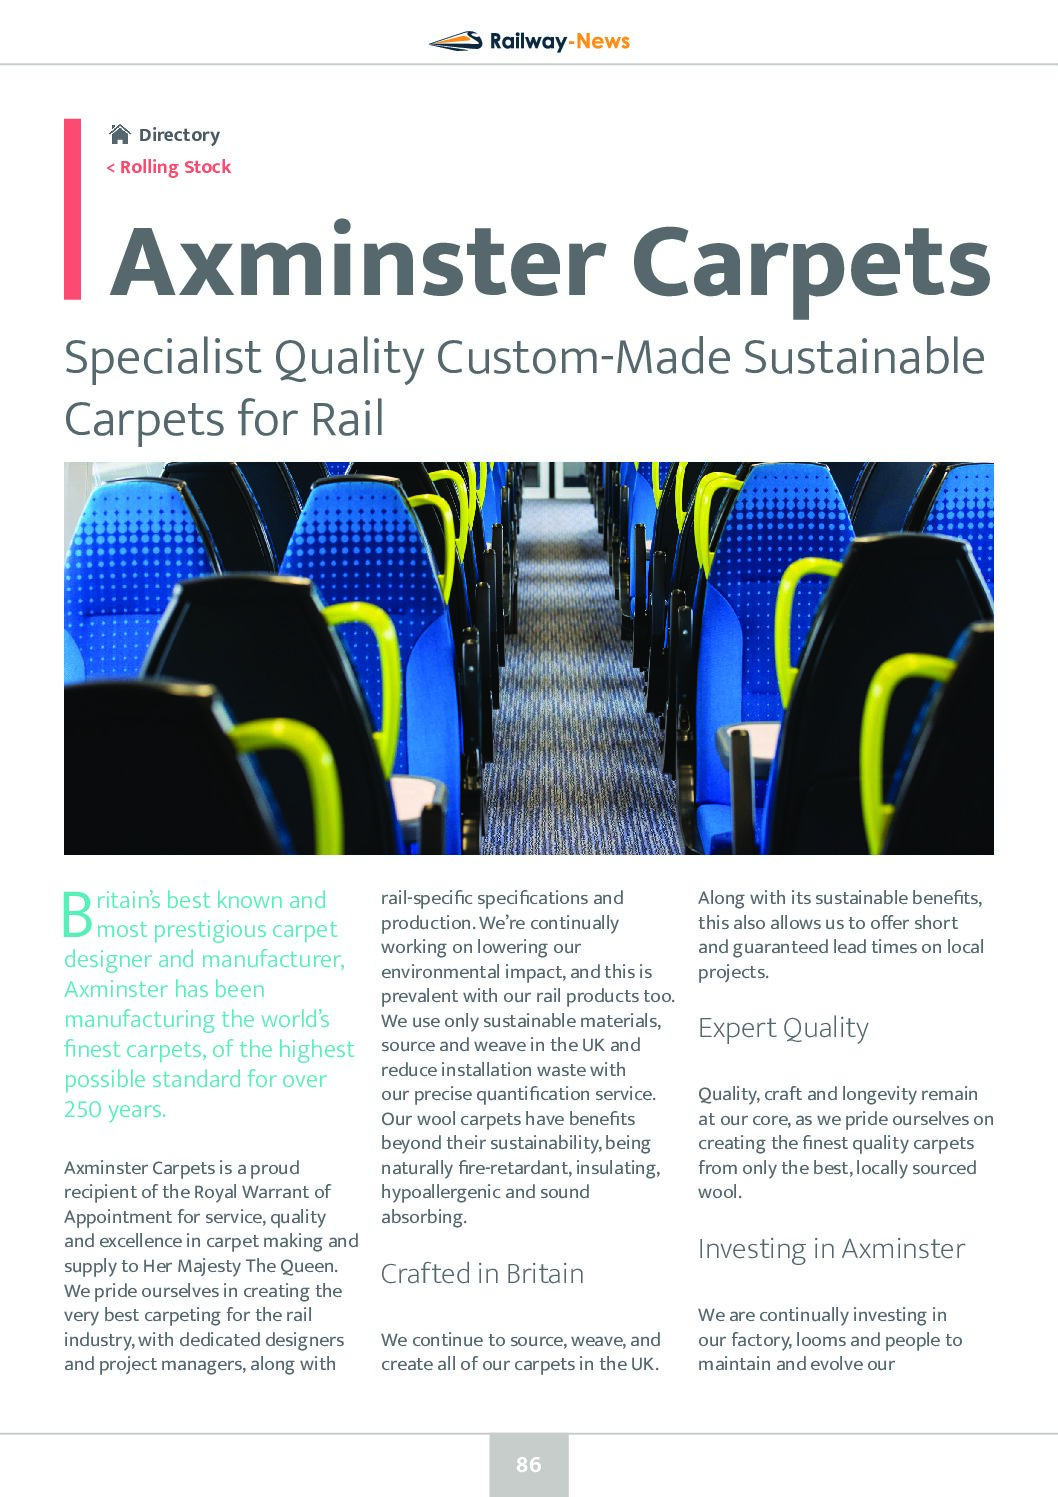 Specialist Quality Custom-Made Sustainable Carpets for Rail